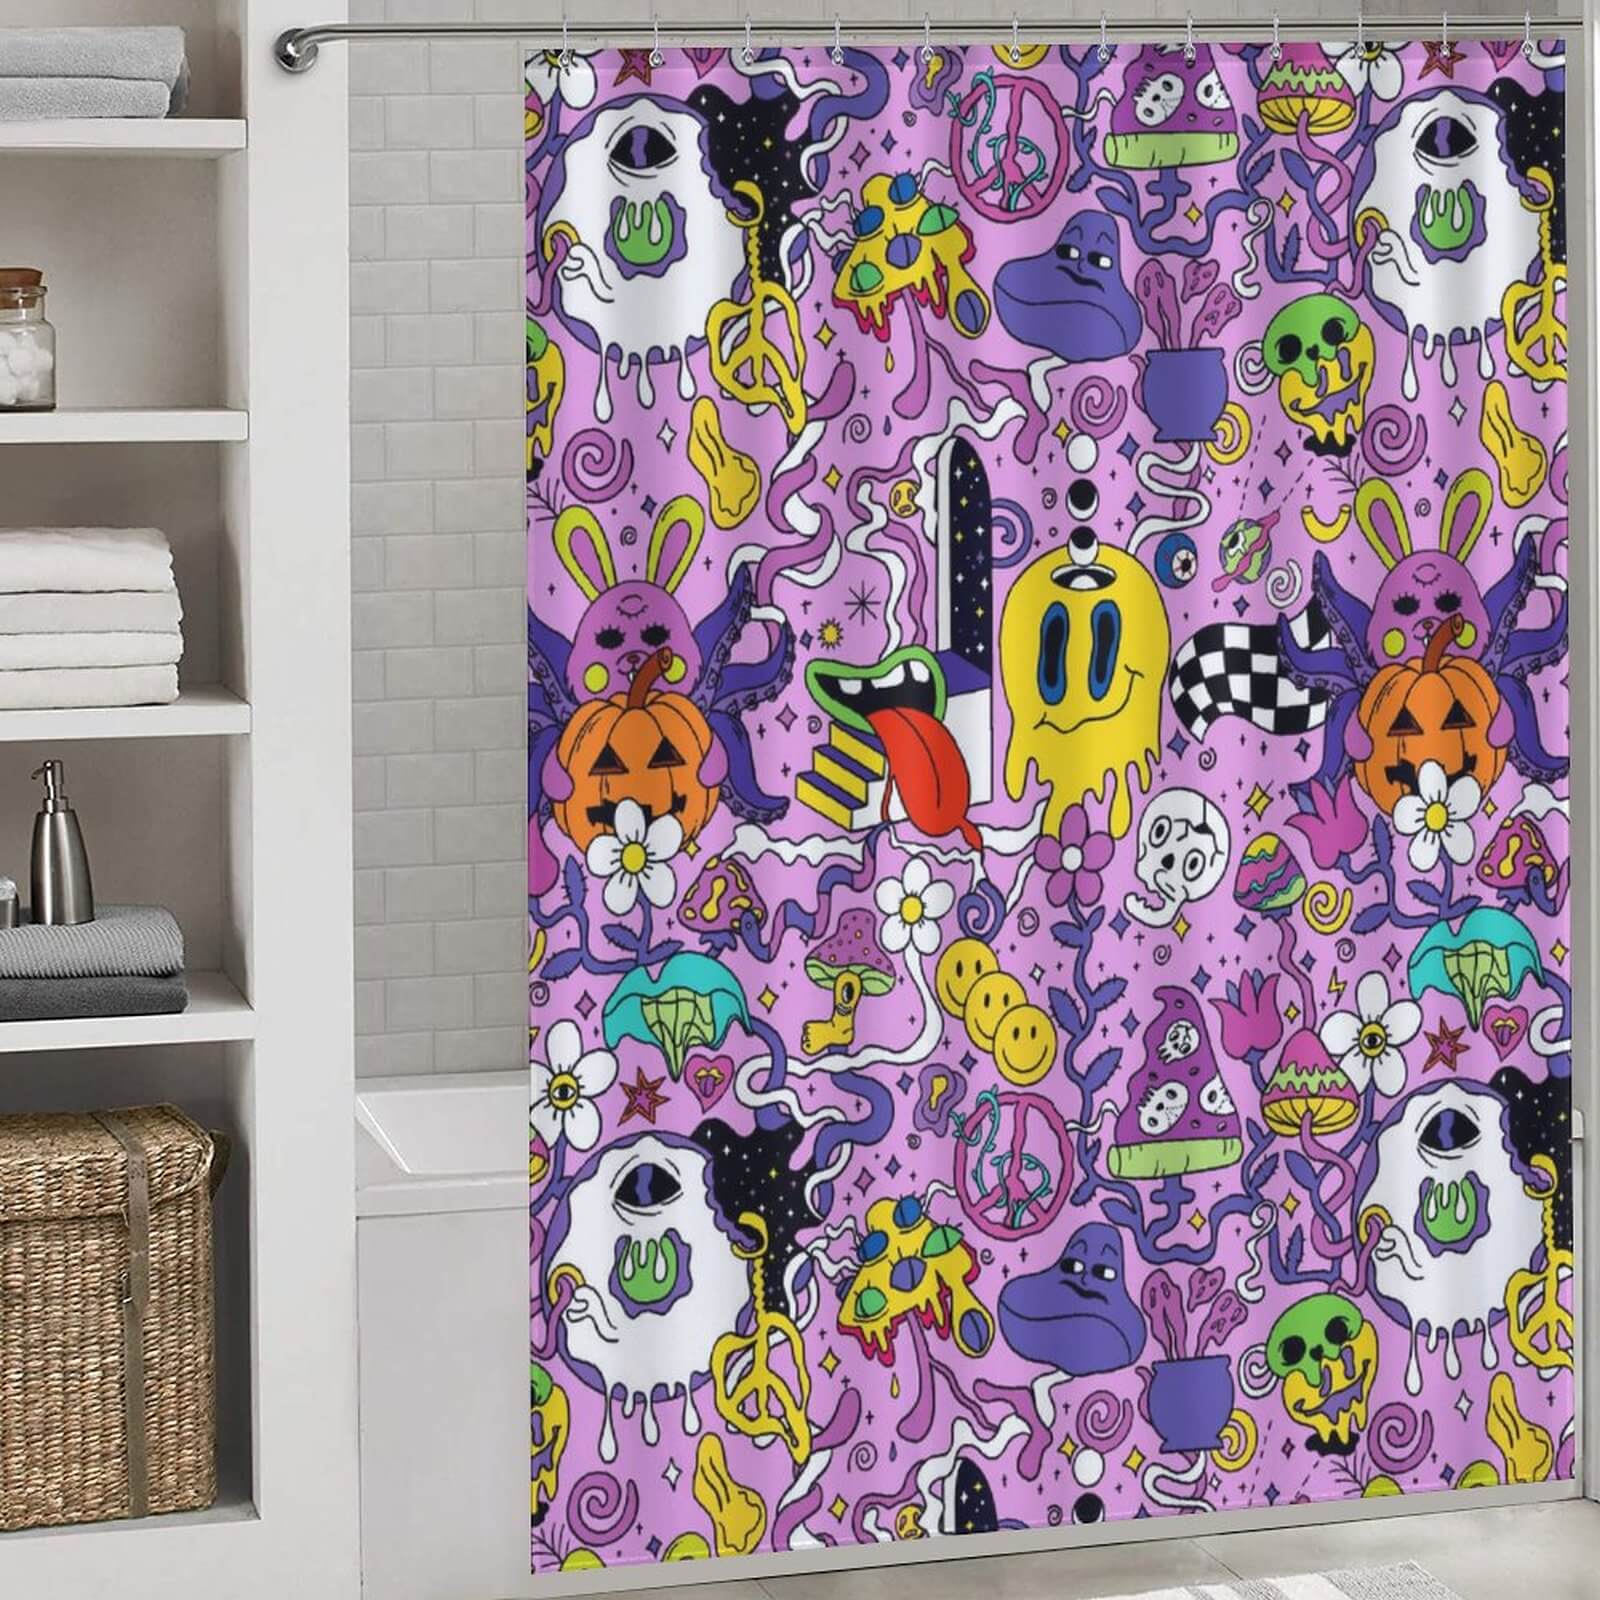 A Psychedelic Trippy Shower Curtain-Cottoncat with a lot of cartoon characters on it from the brand Cotton Cat.